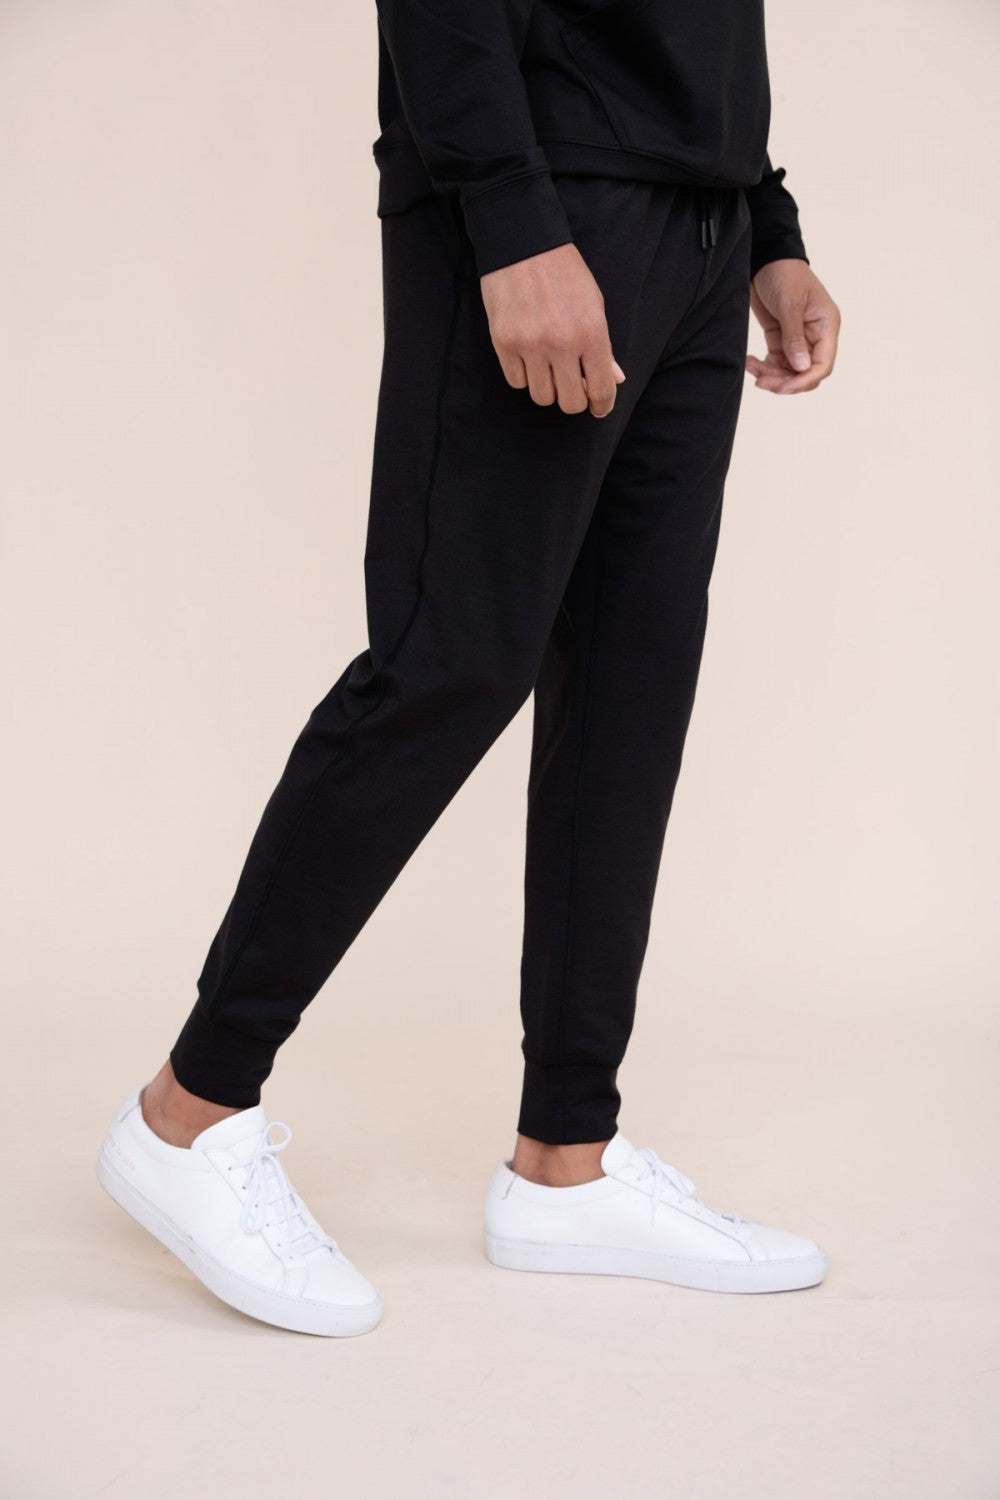 Be The Move Joggers - Men's